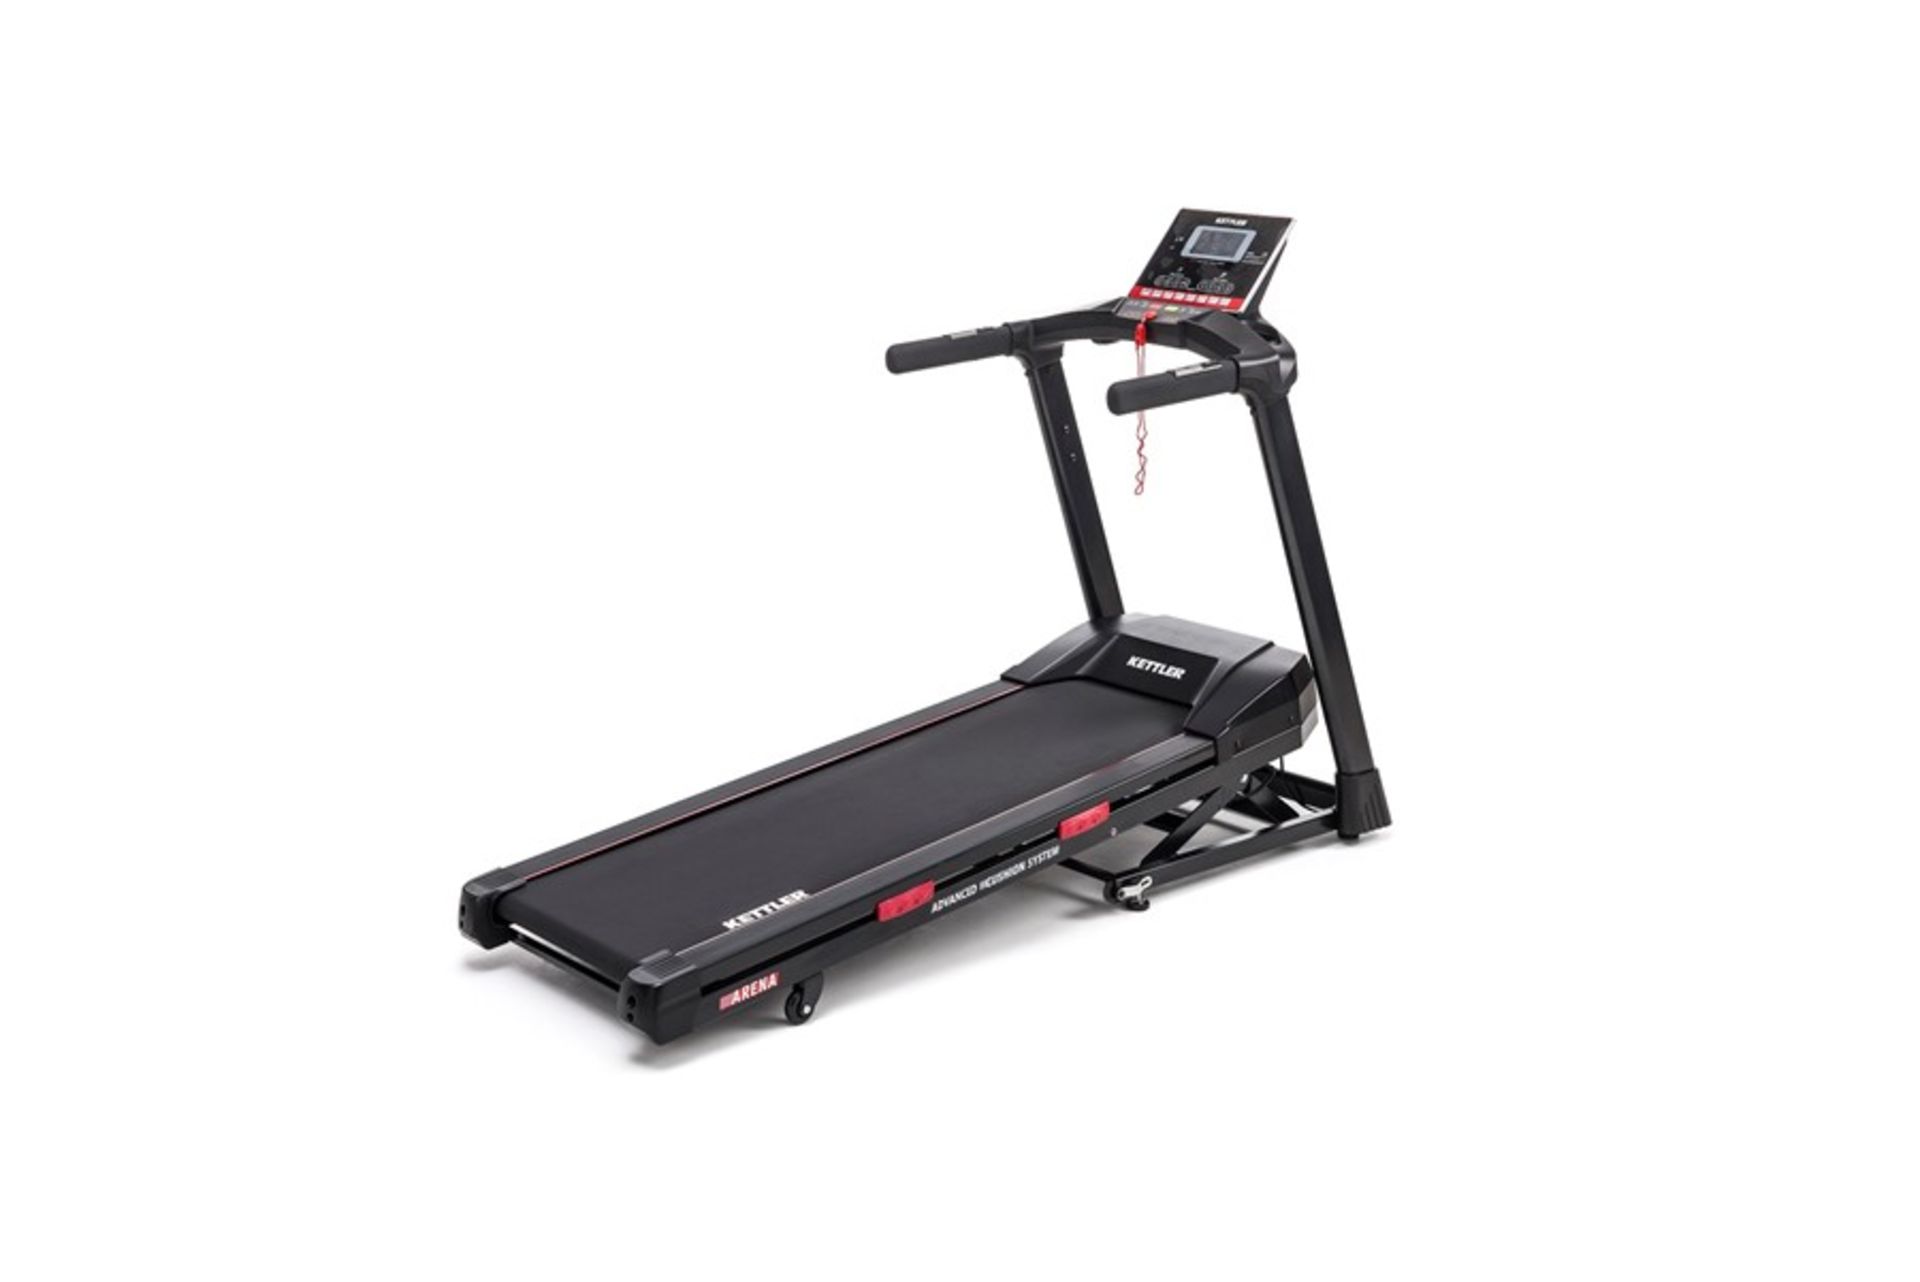 1 KETTLER ARENA TREADMILL / RRP £899.99 - 8985500 (VIEWING HIGHLY RECOMMENDED)